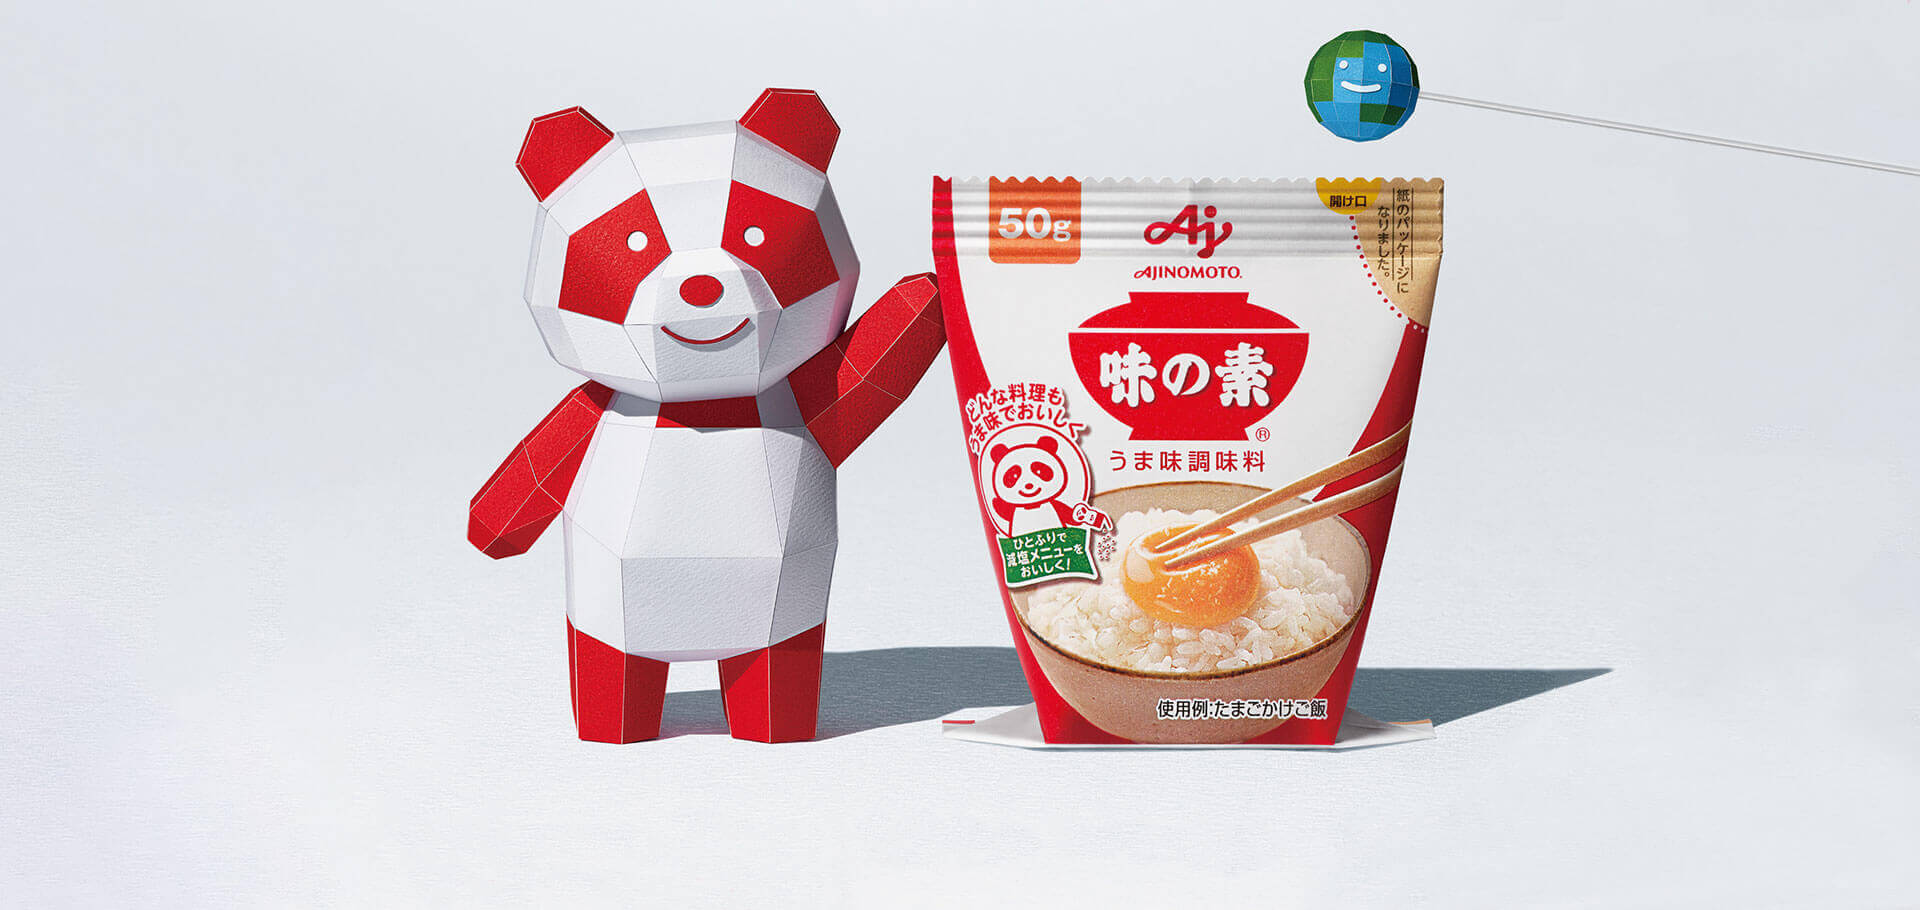 AJI-NO-MOTO® paper packaging: a modern take on an old idea aims to reduce plastic waste